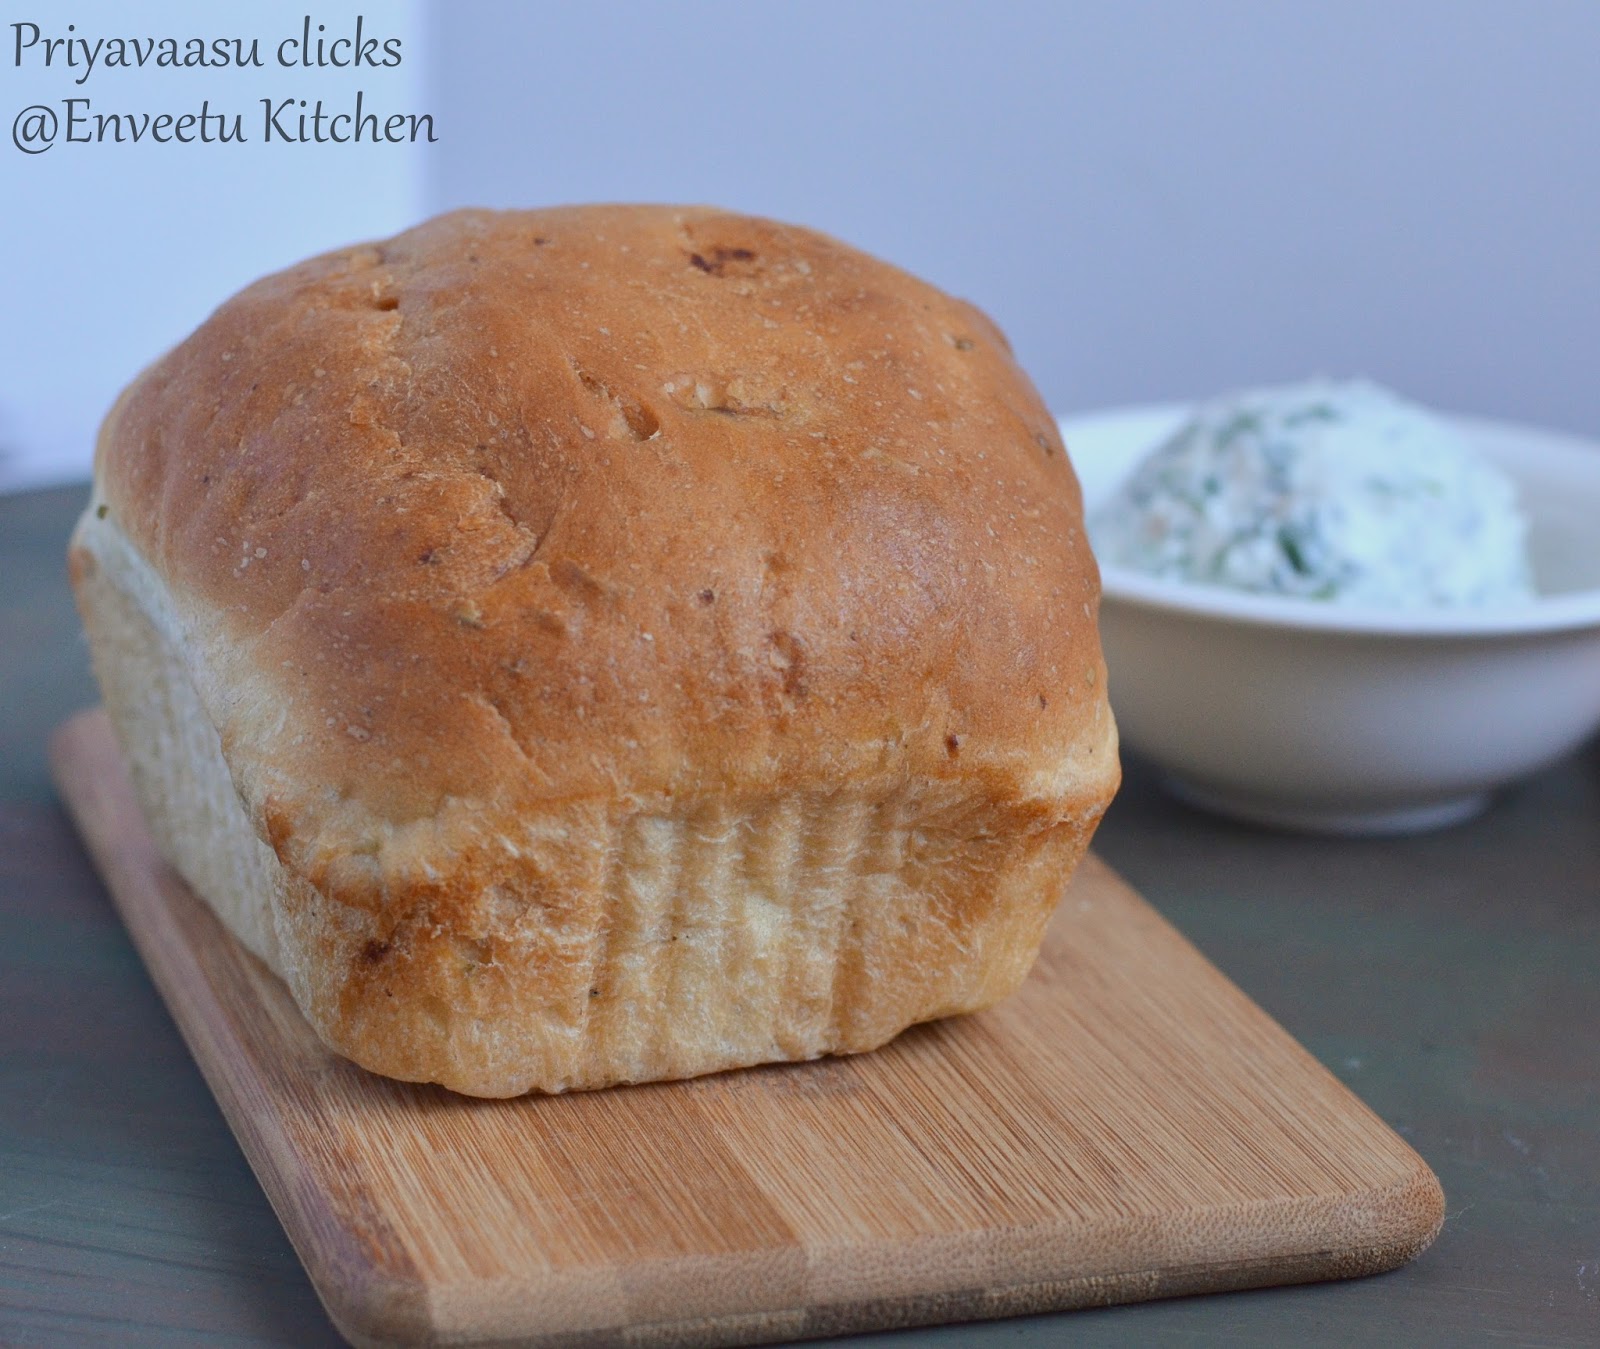 Soft and fluffy panmarino bread